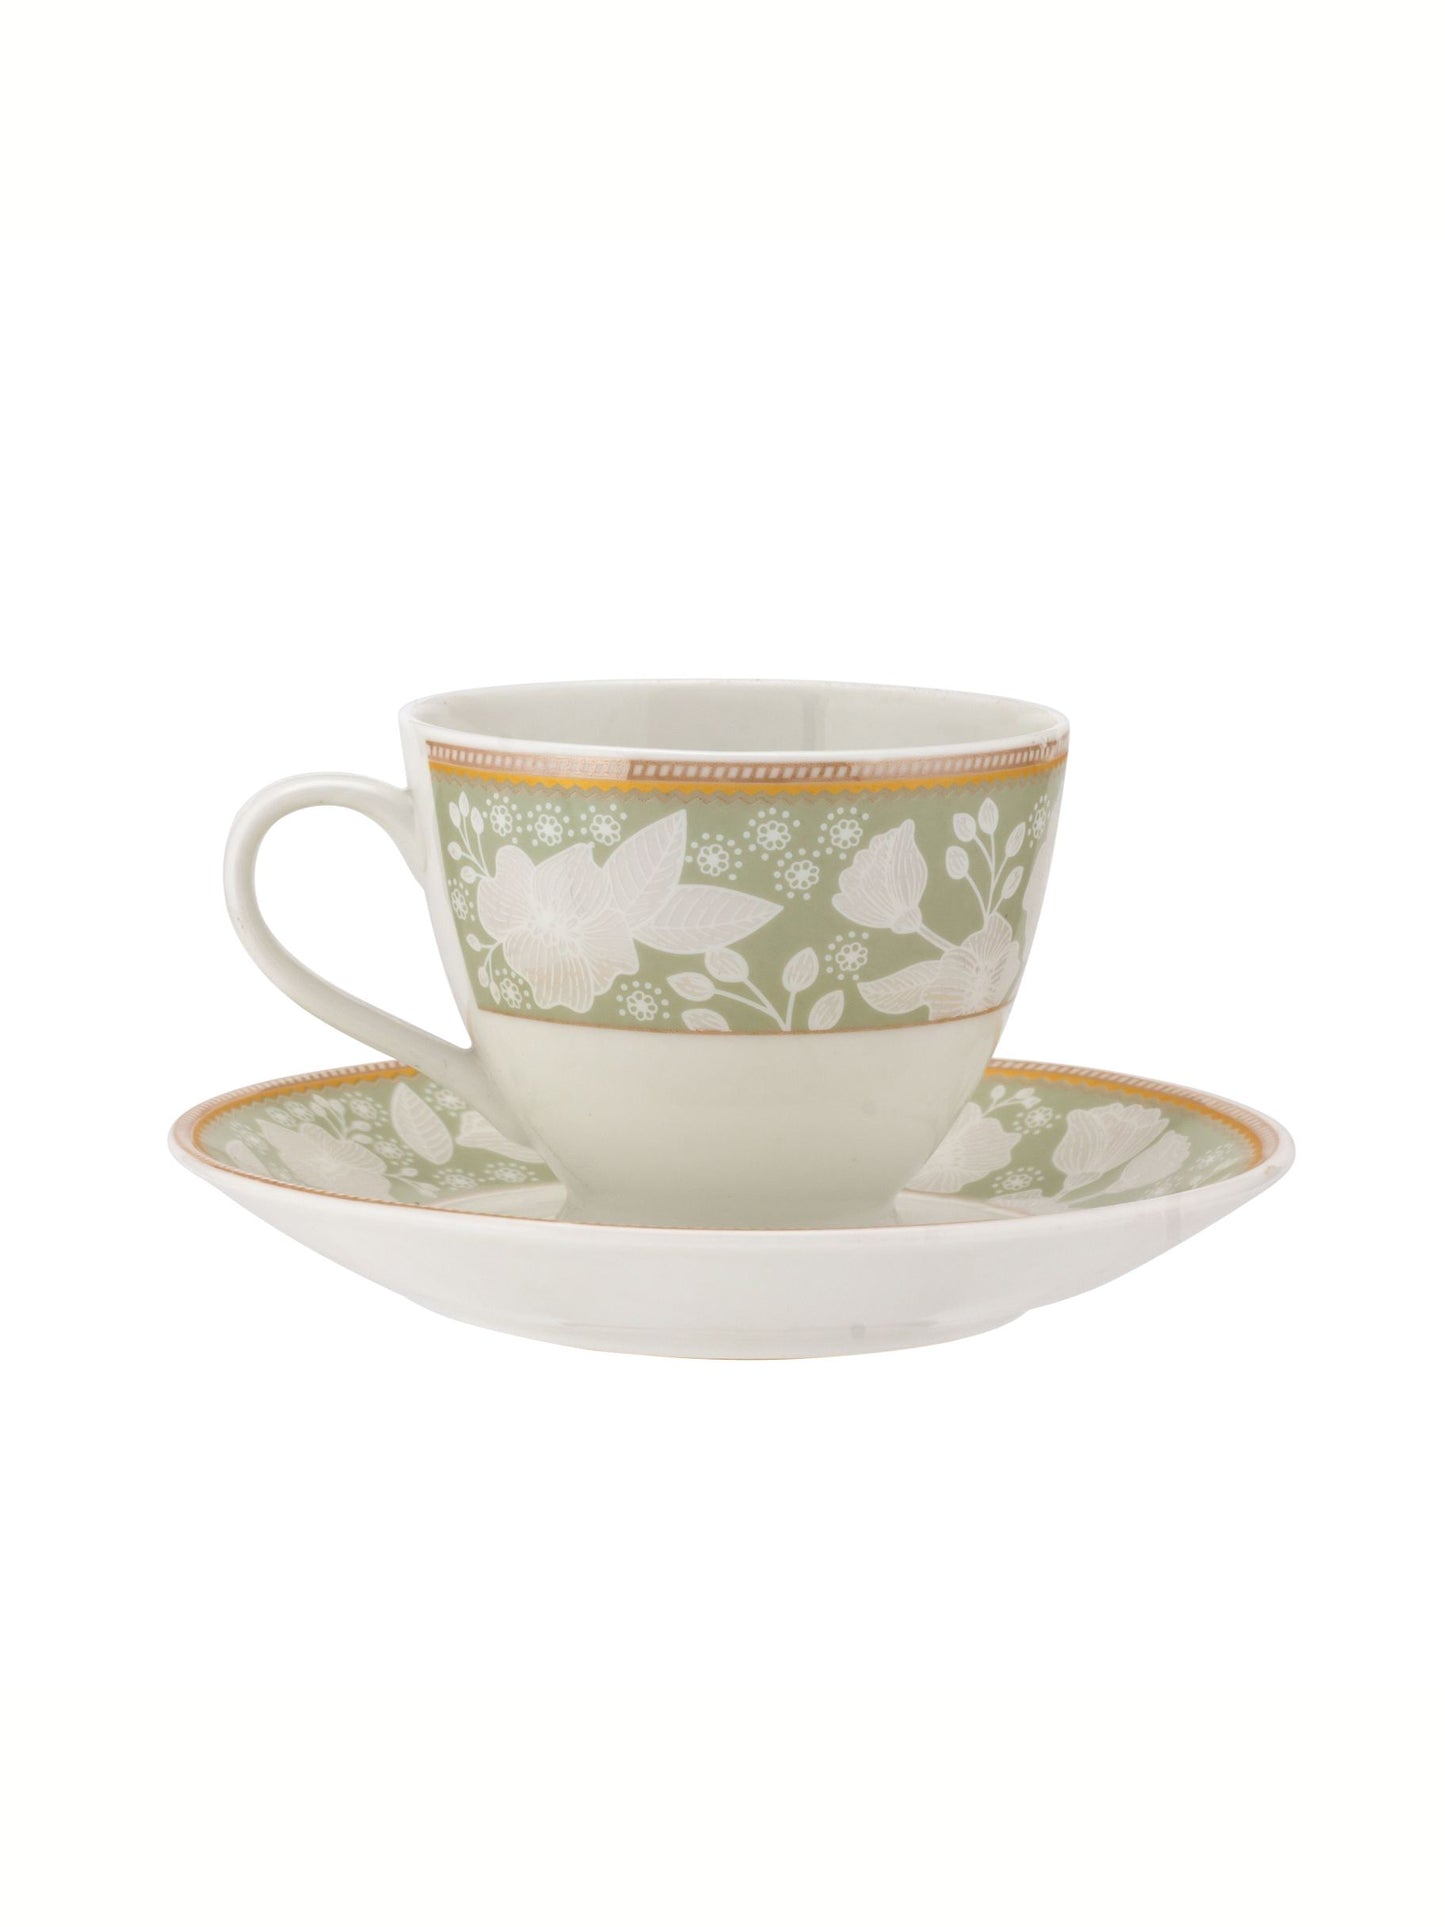 King Super Cup & Saucer, 160 ml, Set of 12 (6 Cups + 6 Saucers) (S387)